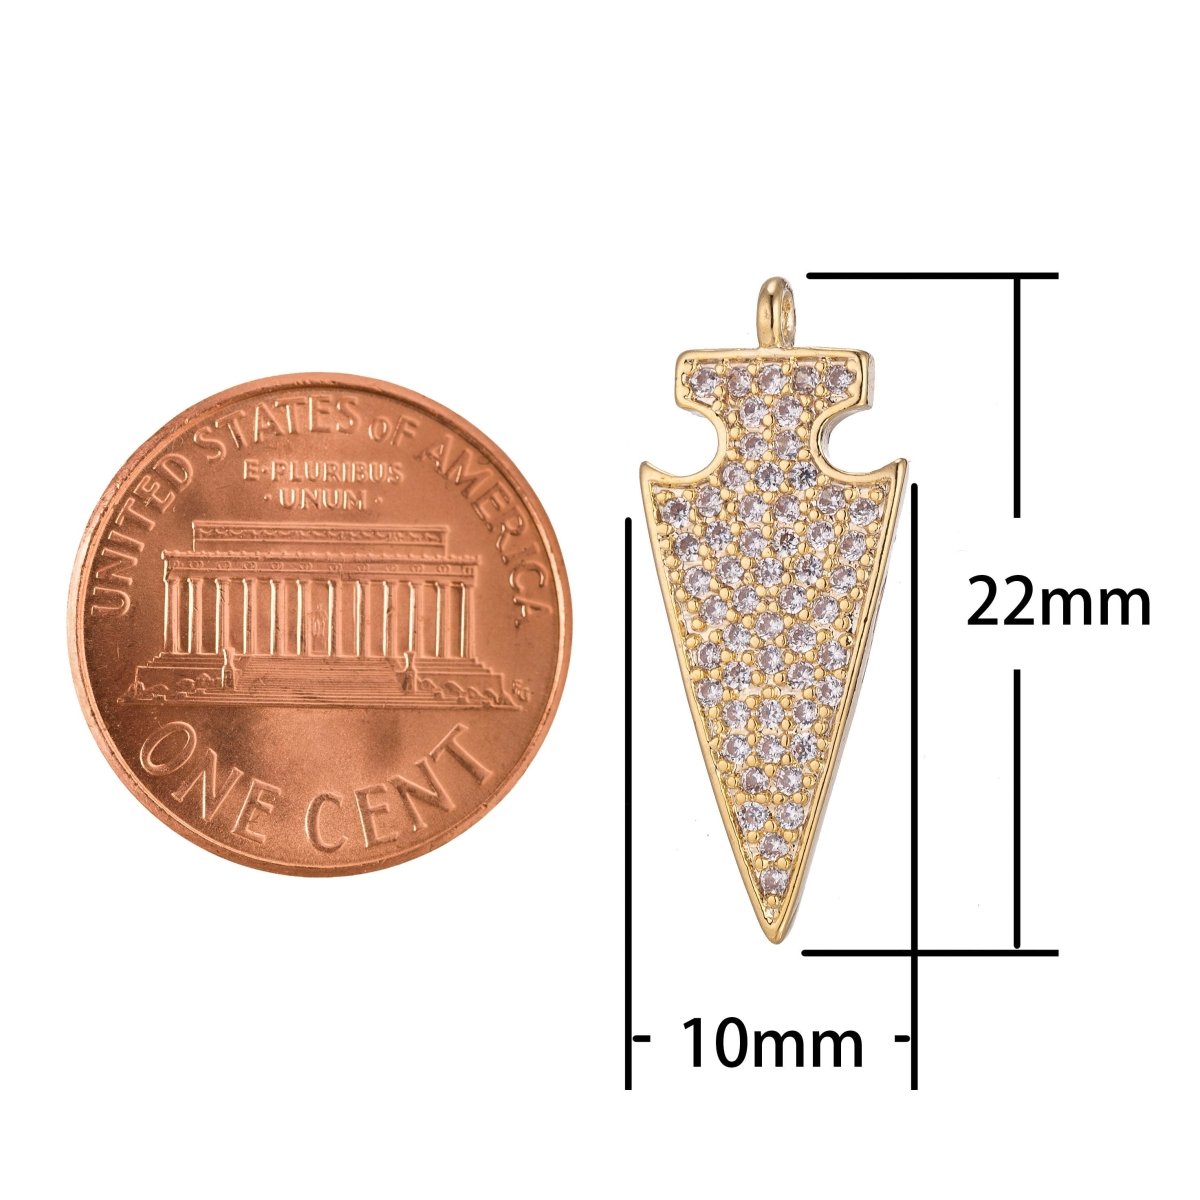 Golden Shield Charm, Micro Pave CZ Charm, 18K Gold Filled Pendant Dainty Arrow Point Puzzle Piece Necklace Charm for Jewelry MakingC-380 - DLUXCA